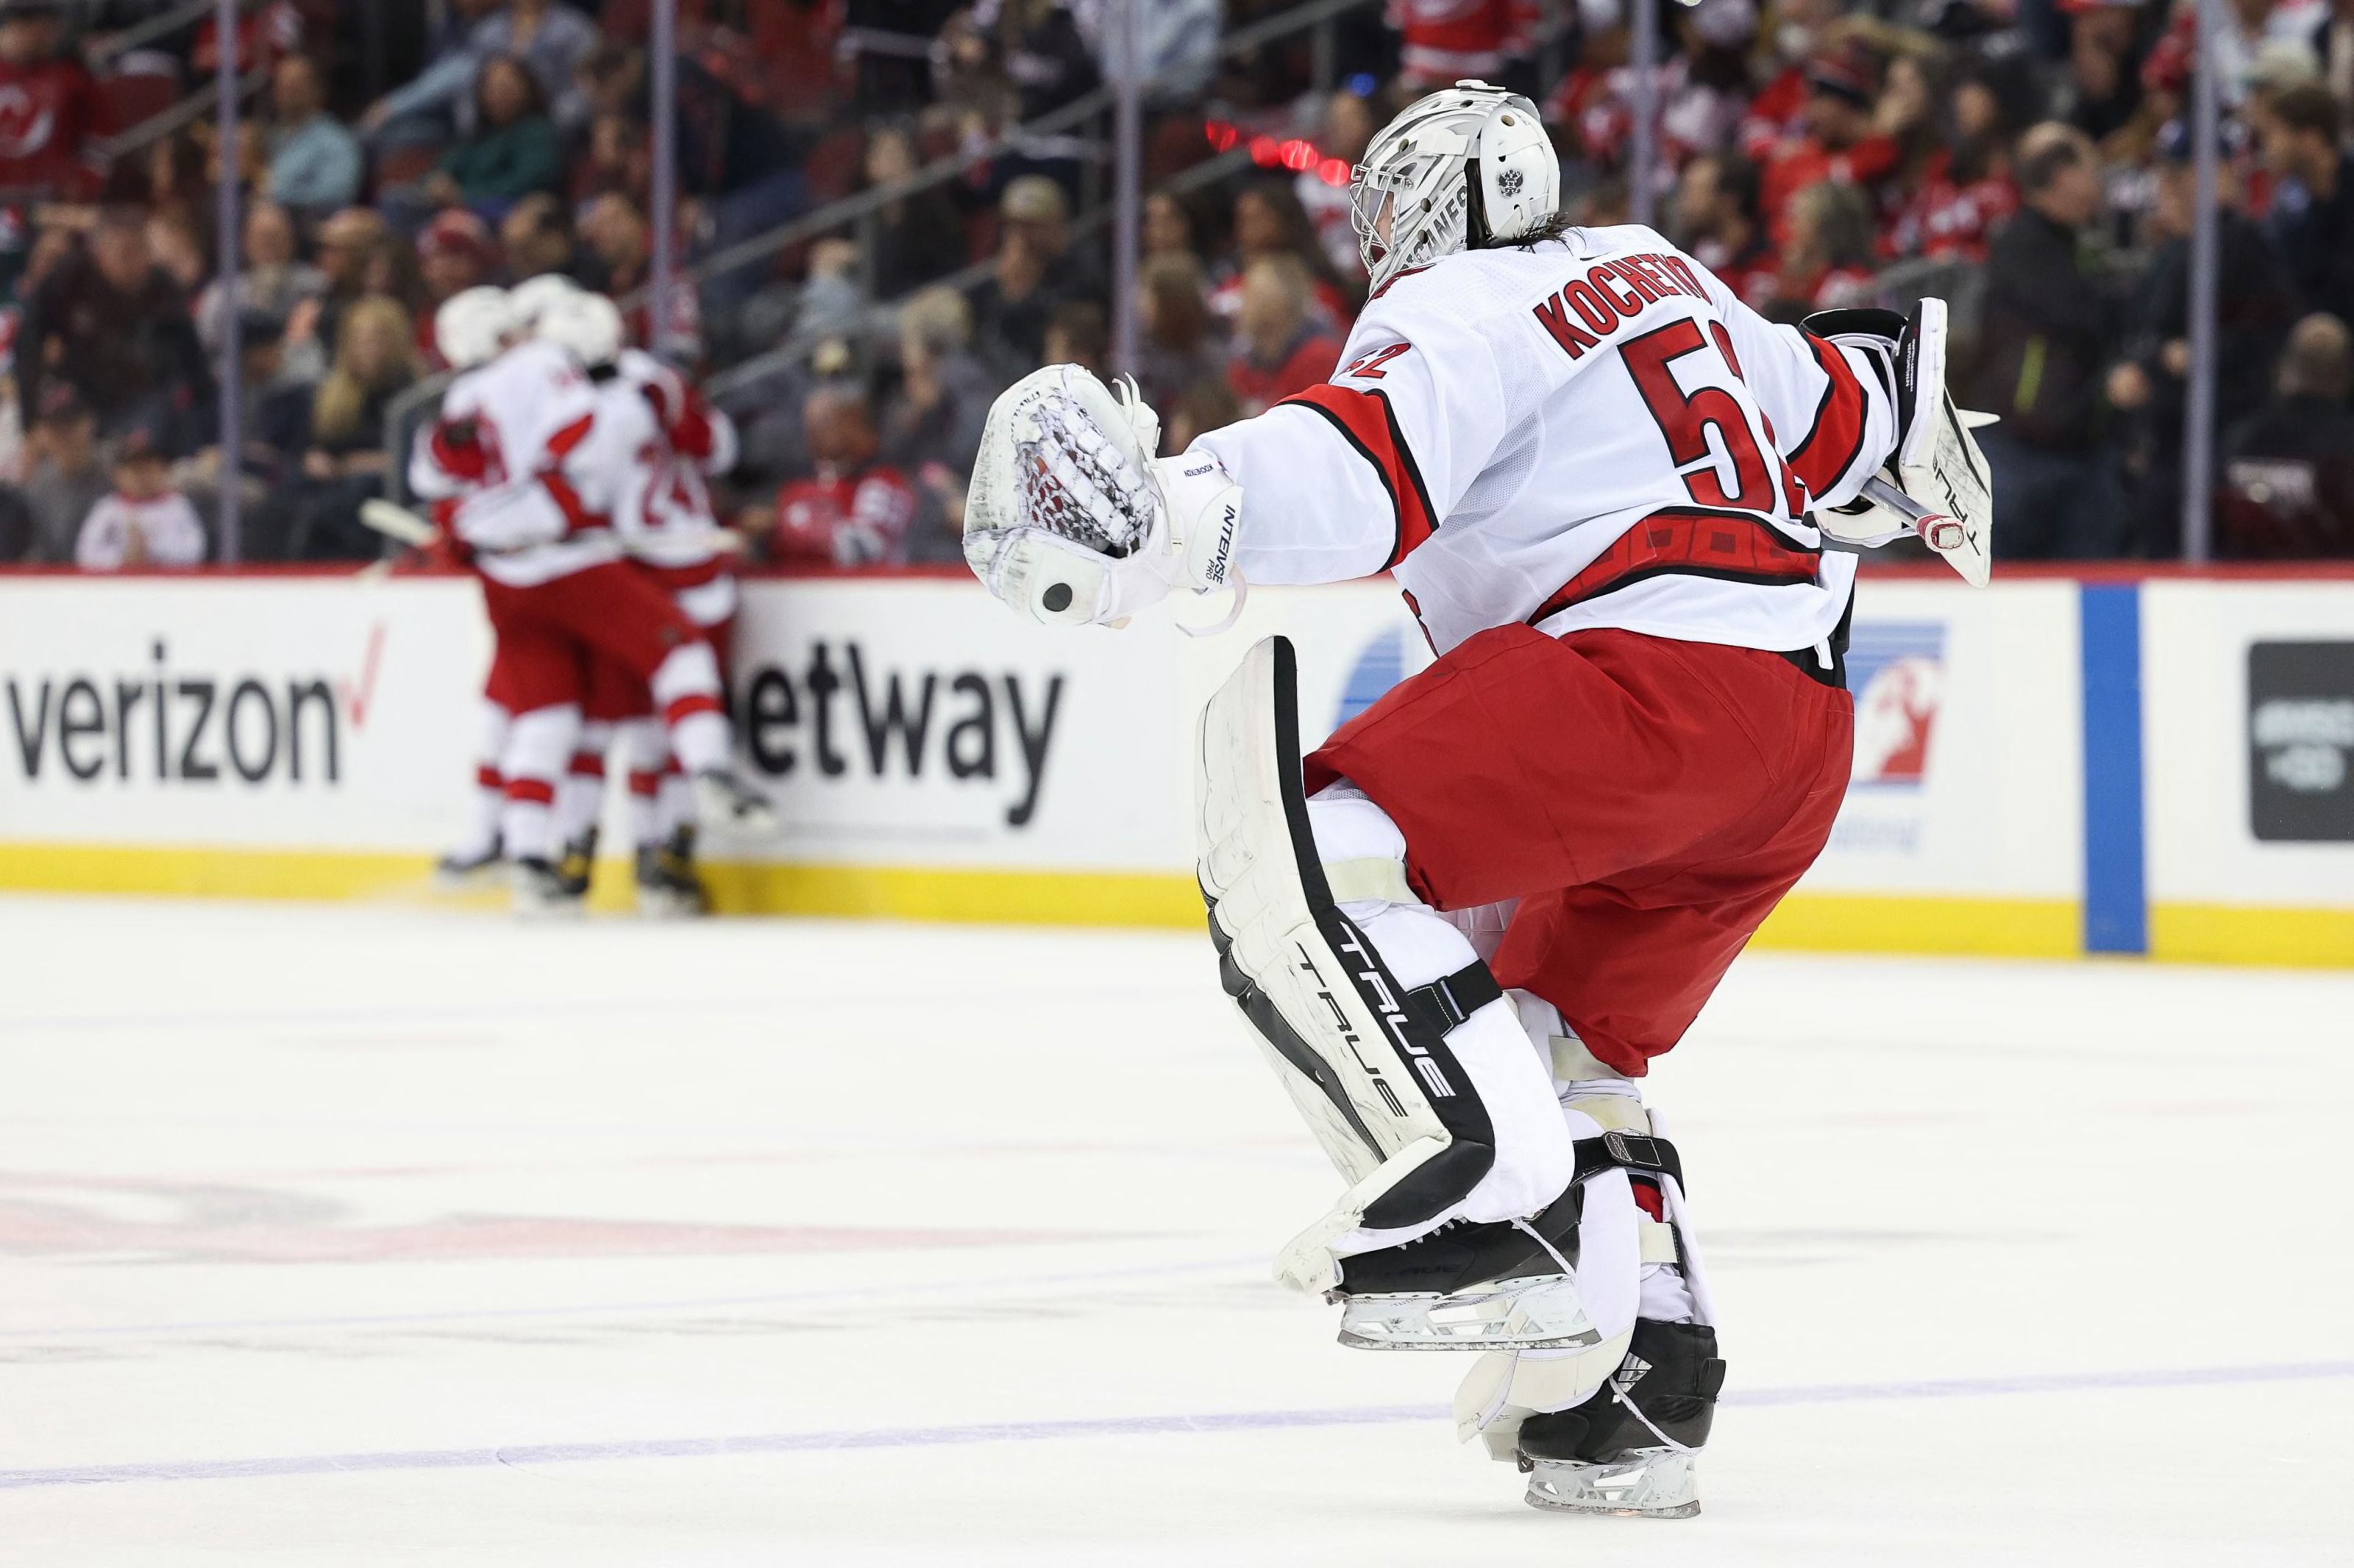 What should the Canes do with goaltending heading into the playoffs